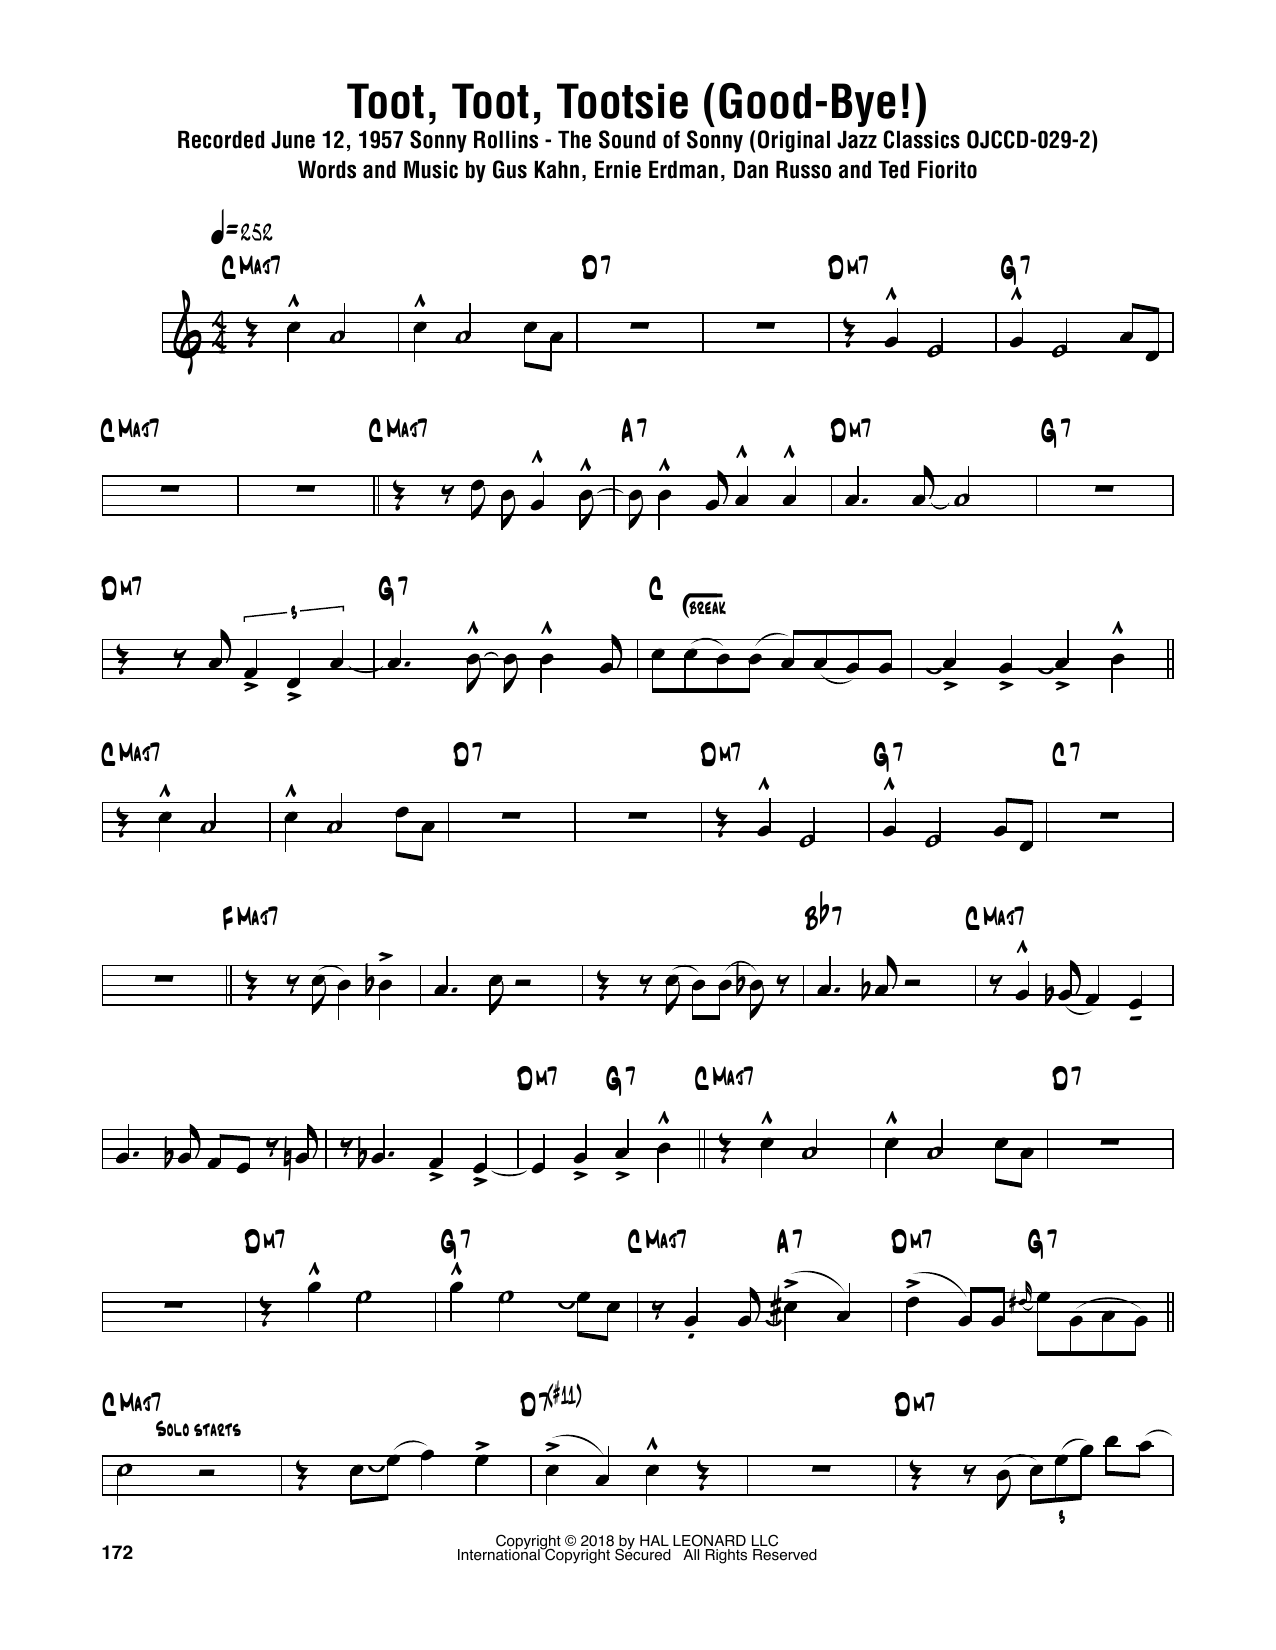 Download Sonny Rollins Toot, Toot, Tootsie! (Good-bye!) Sheet Music